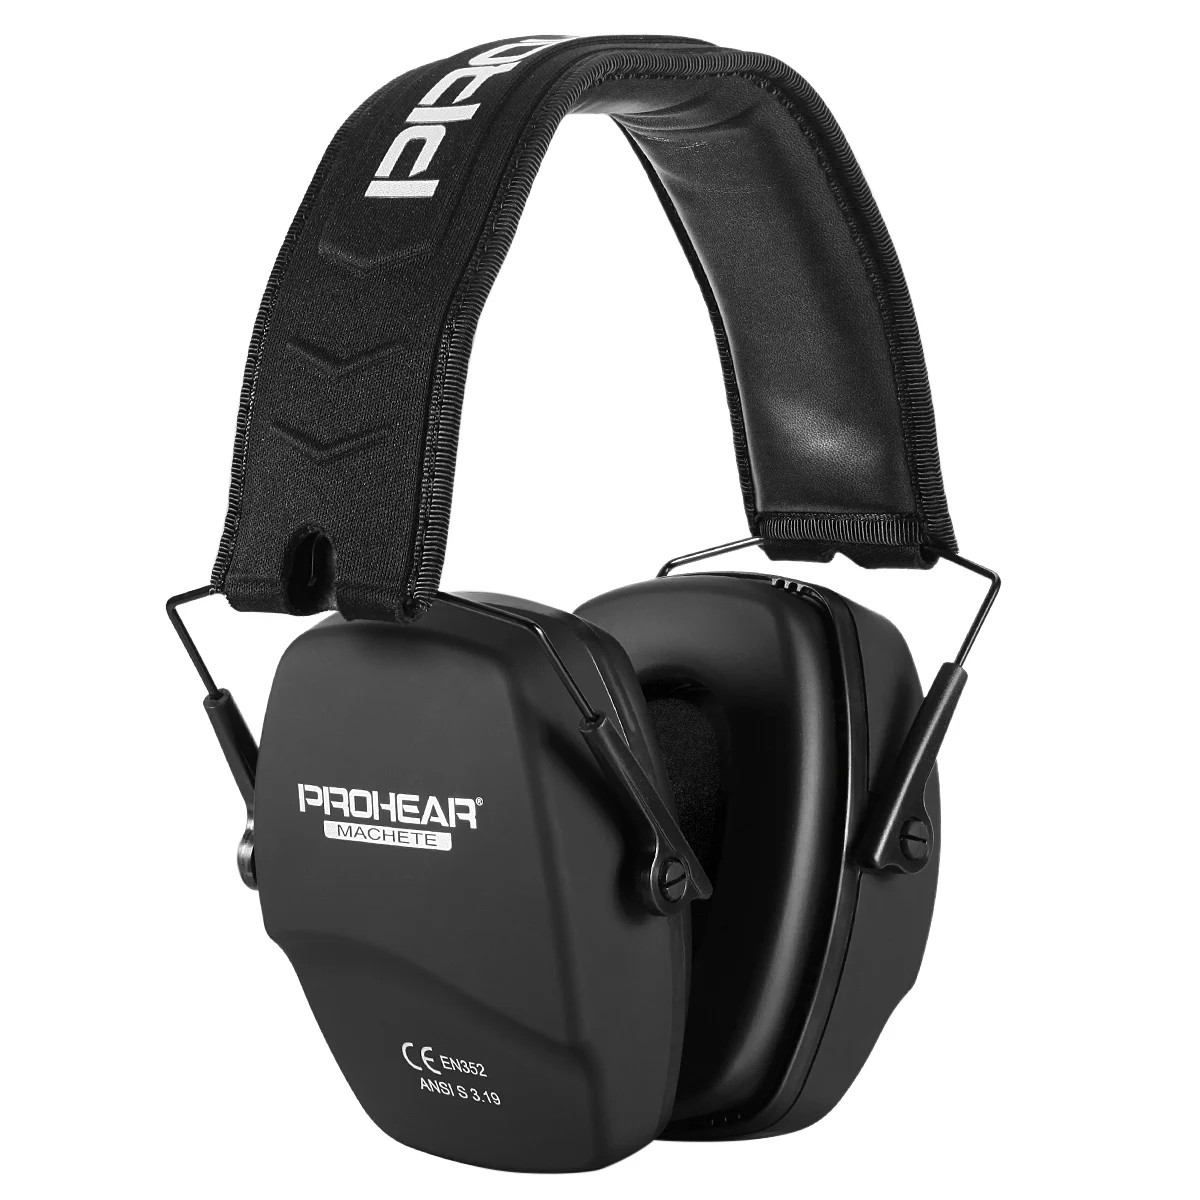 
Earmuffs Hearing Protection Anti noise Shooting Sound Proof Ear Muff Defenders  (1600128212875)